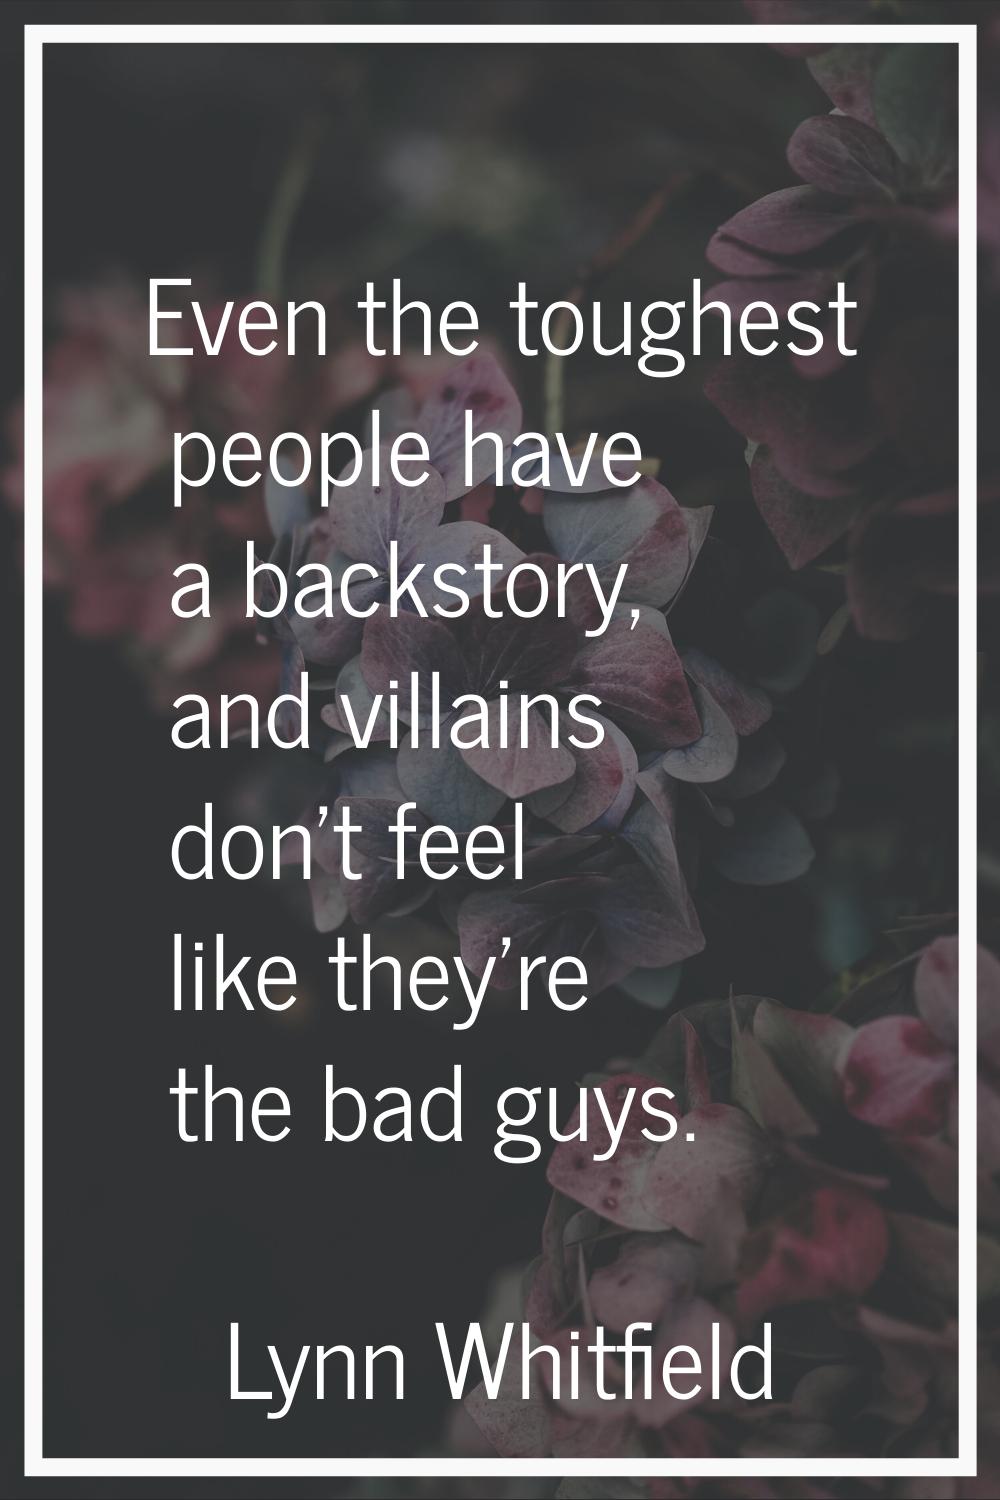 Even the toughest people have a backstory, and villains don't feel like they're the bad guys.